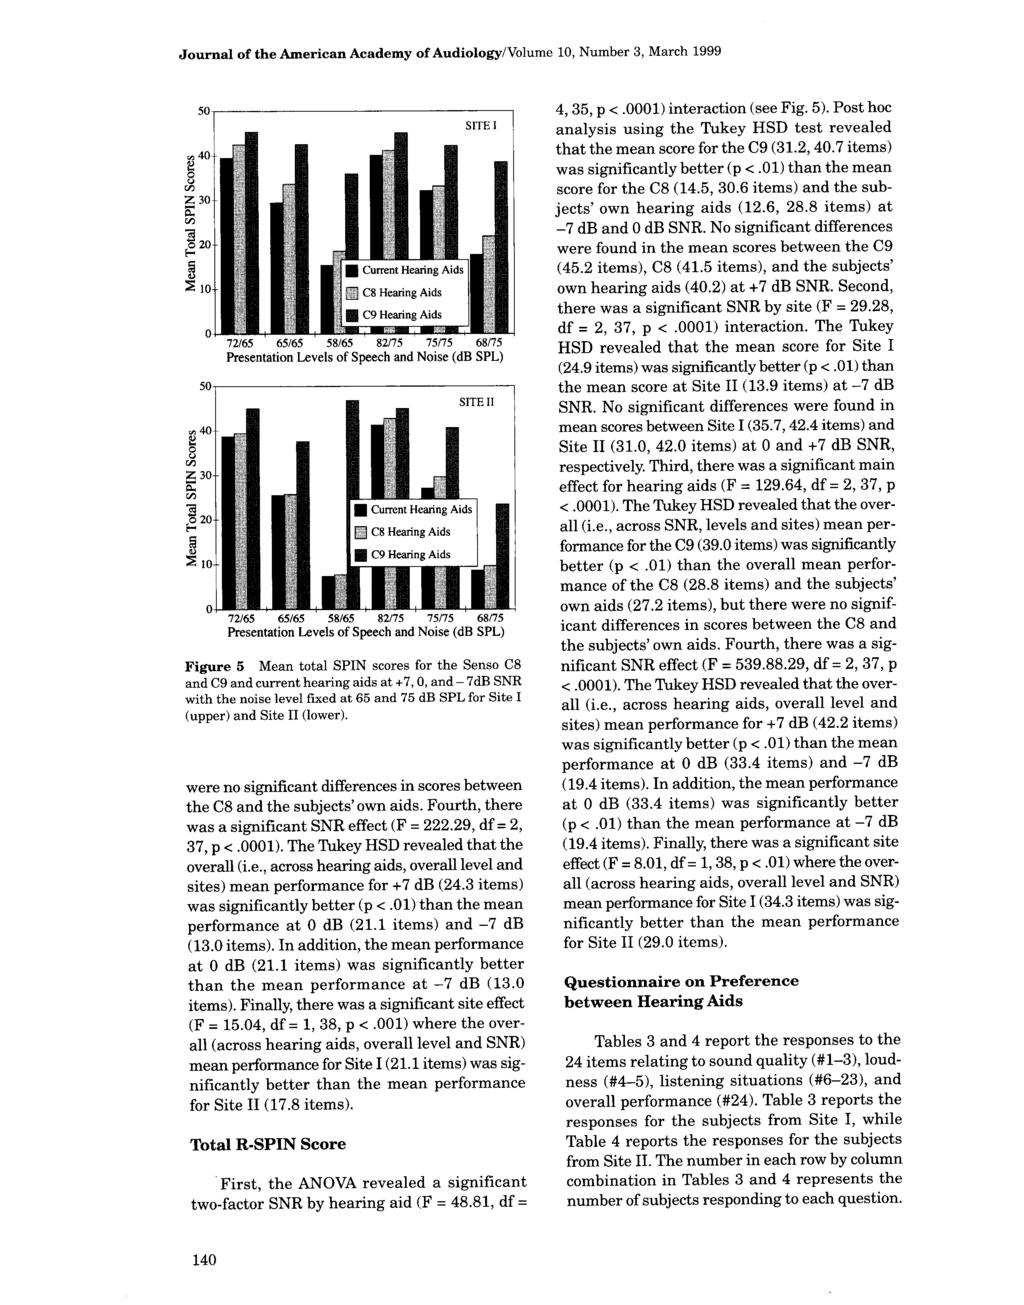 Journal of the American Academy of Audiology/Volume 10, Number 3, March 1999 72/65 65/65 58/65 82/75 75/75 68/75 Presentation Levels of Speech and Noise (db SPL) 72/65 65/65 58/65 82/75 75/75 68/75